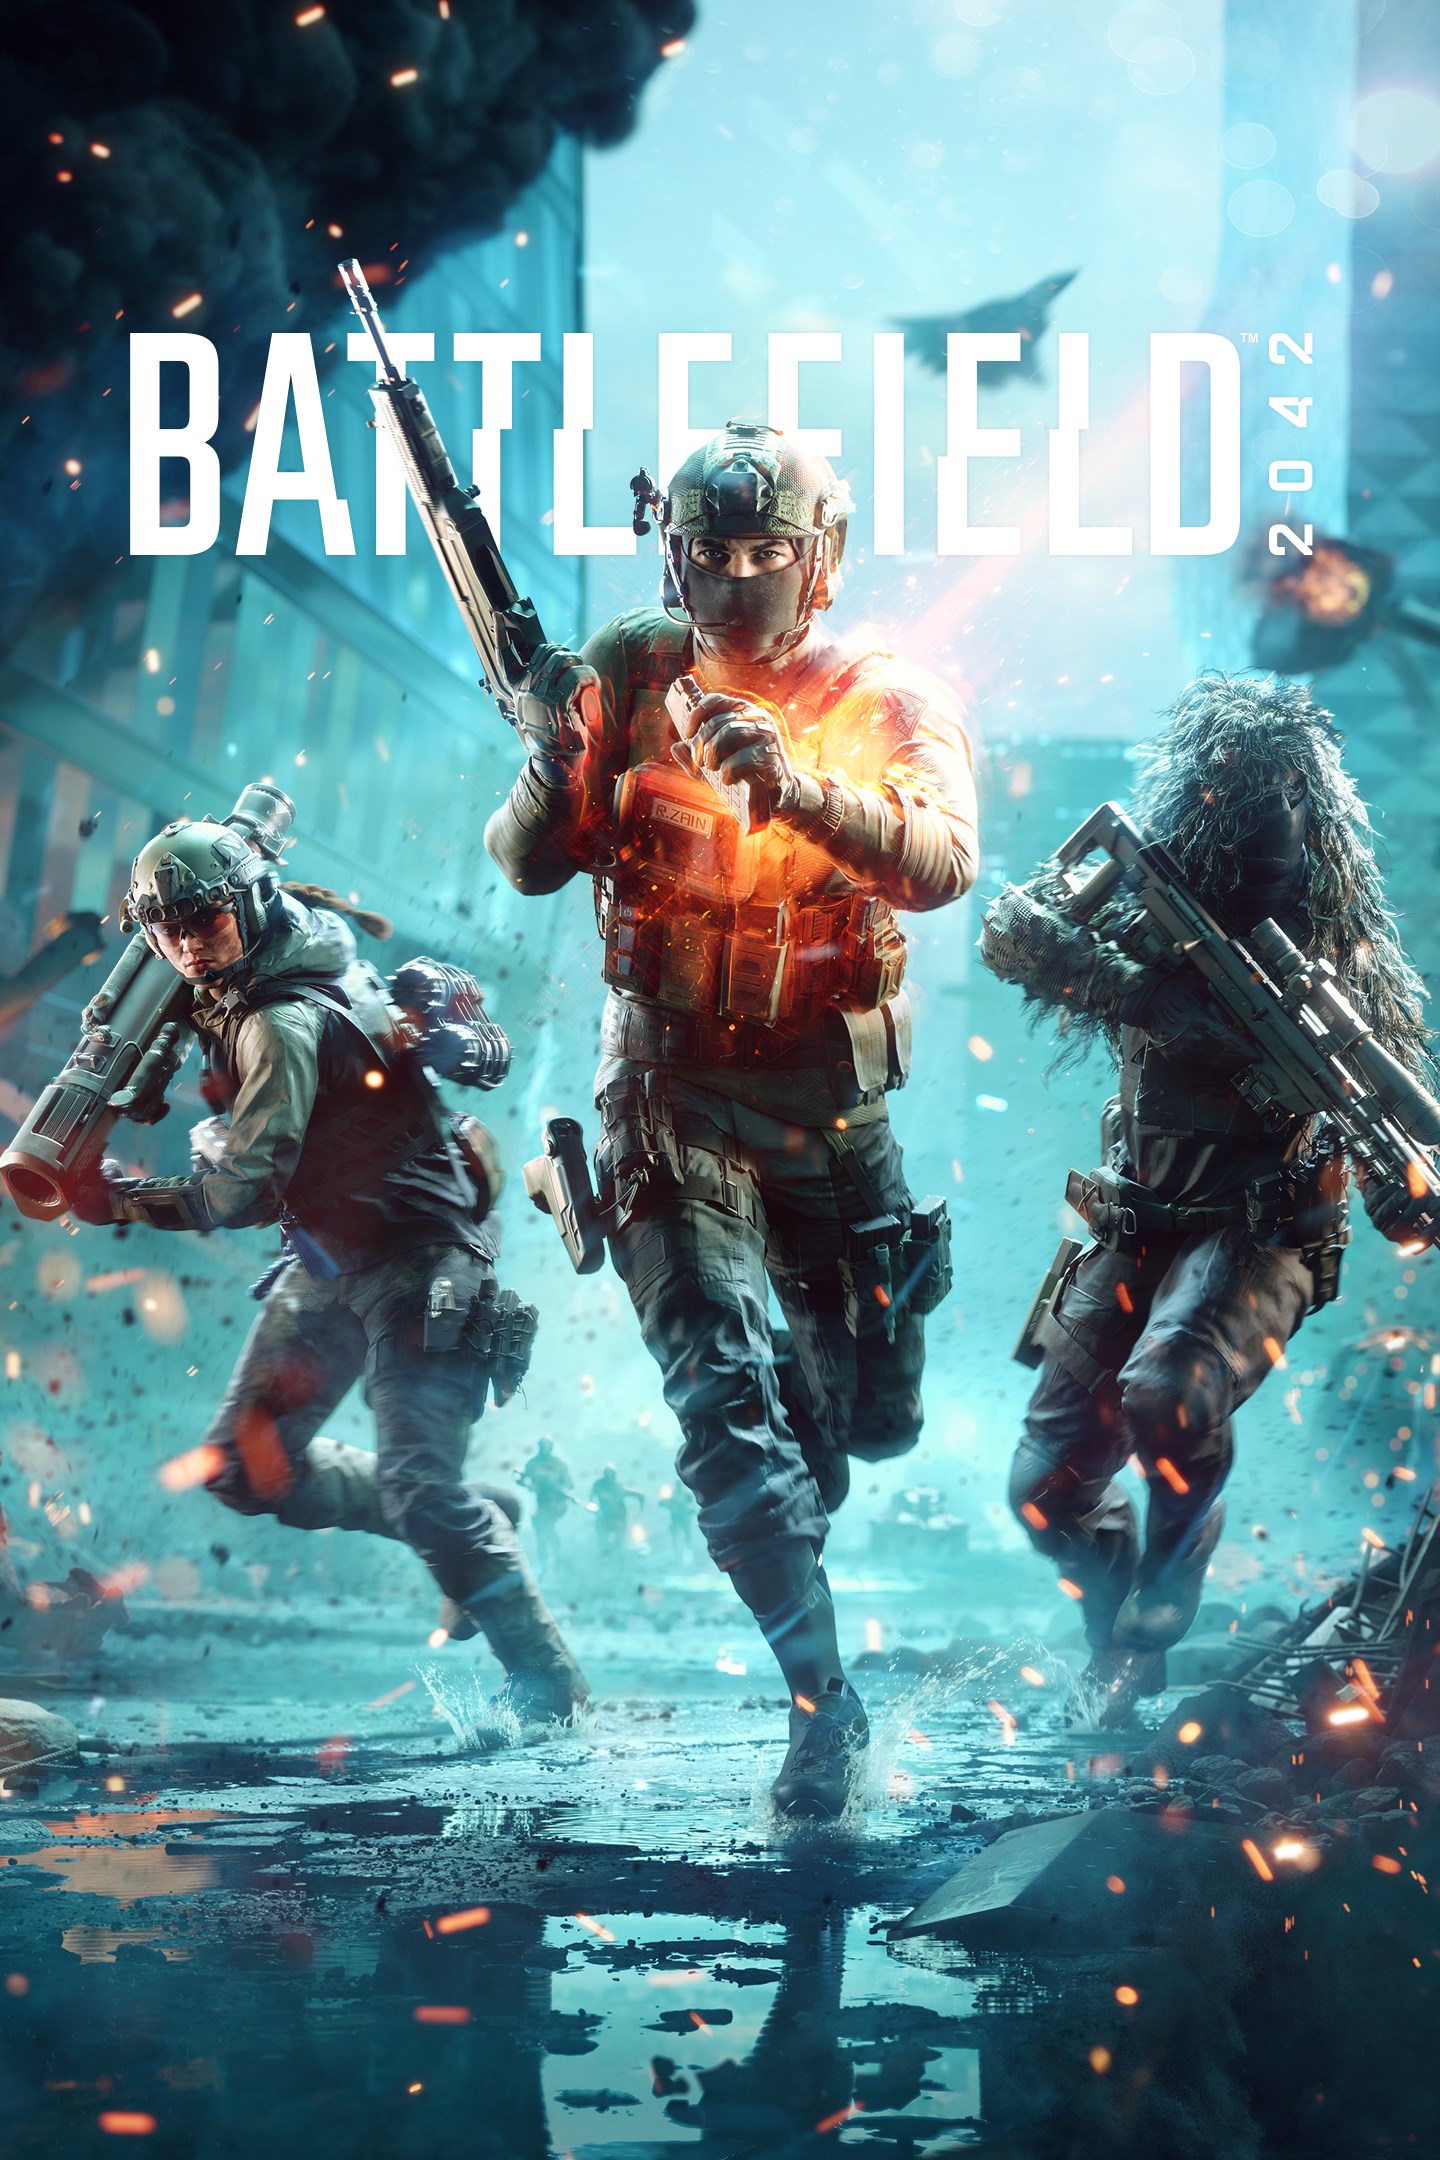 Battlefield 4 receives new UI, Details and Video Inside - The Tech